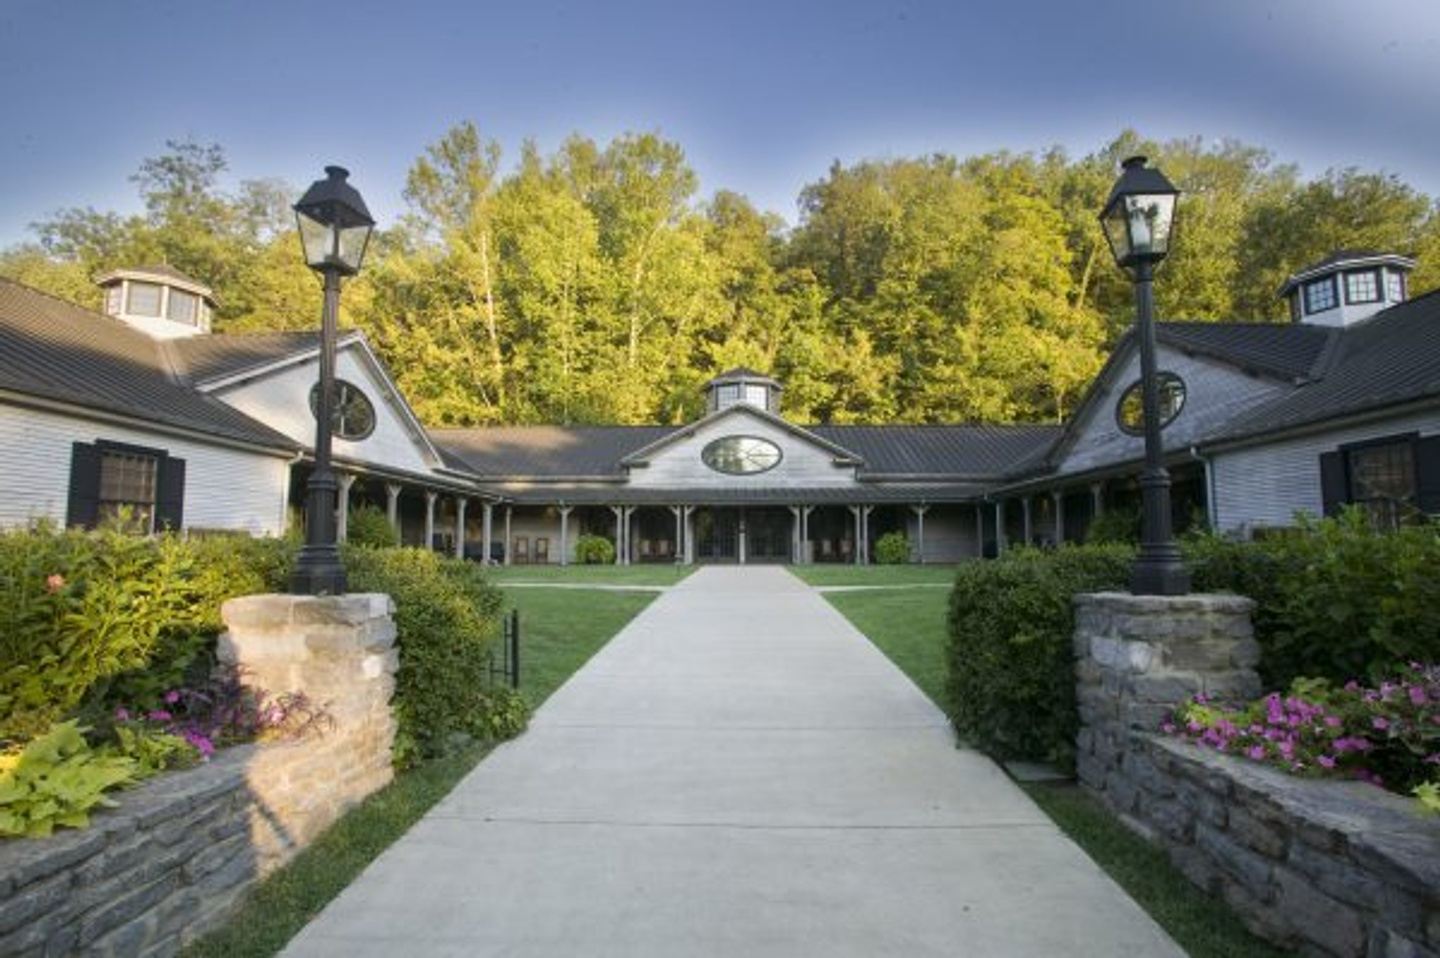 Jack Daniel's Distillery Tour - 7/29 from 9am to 5pm